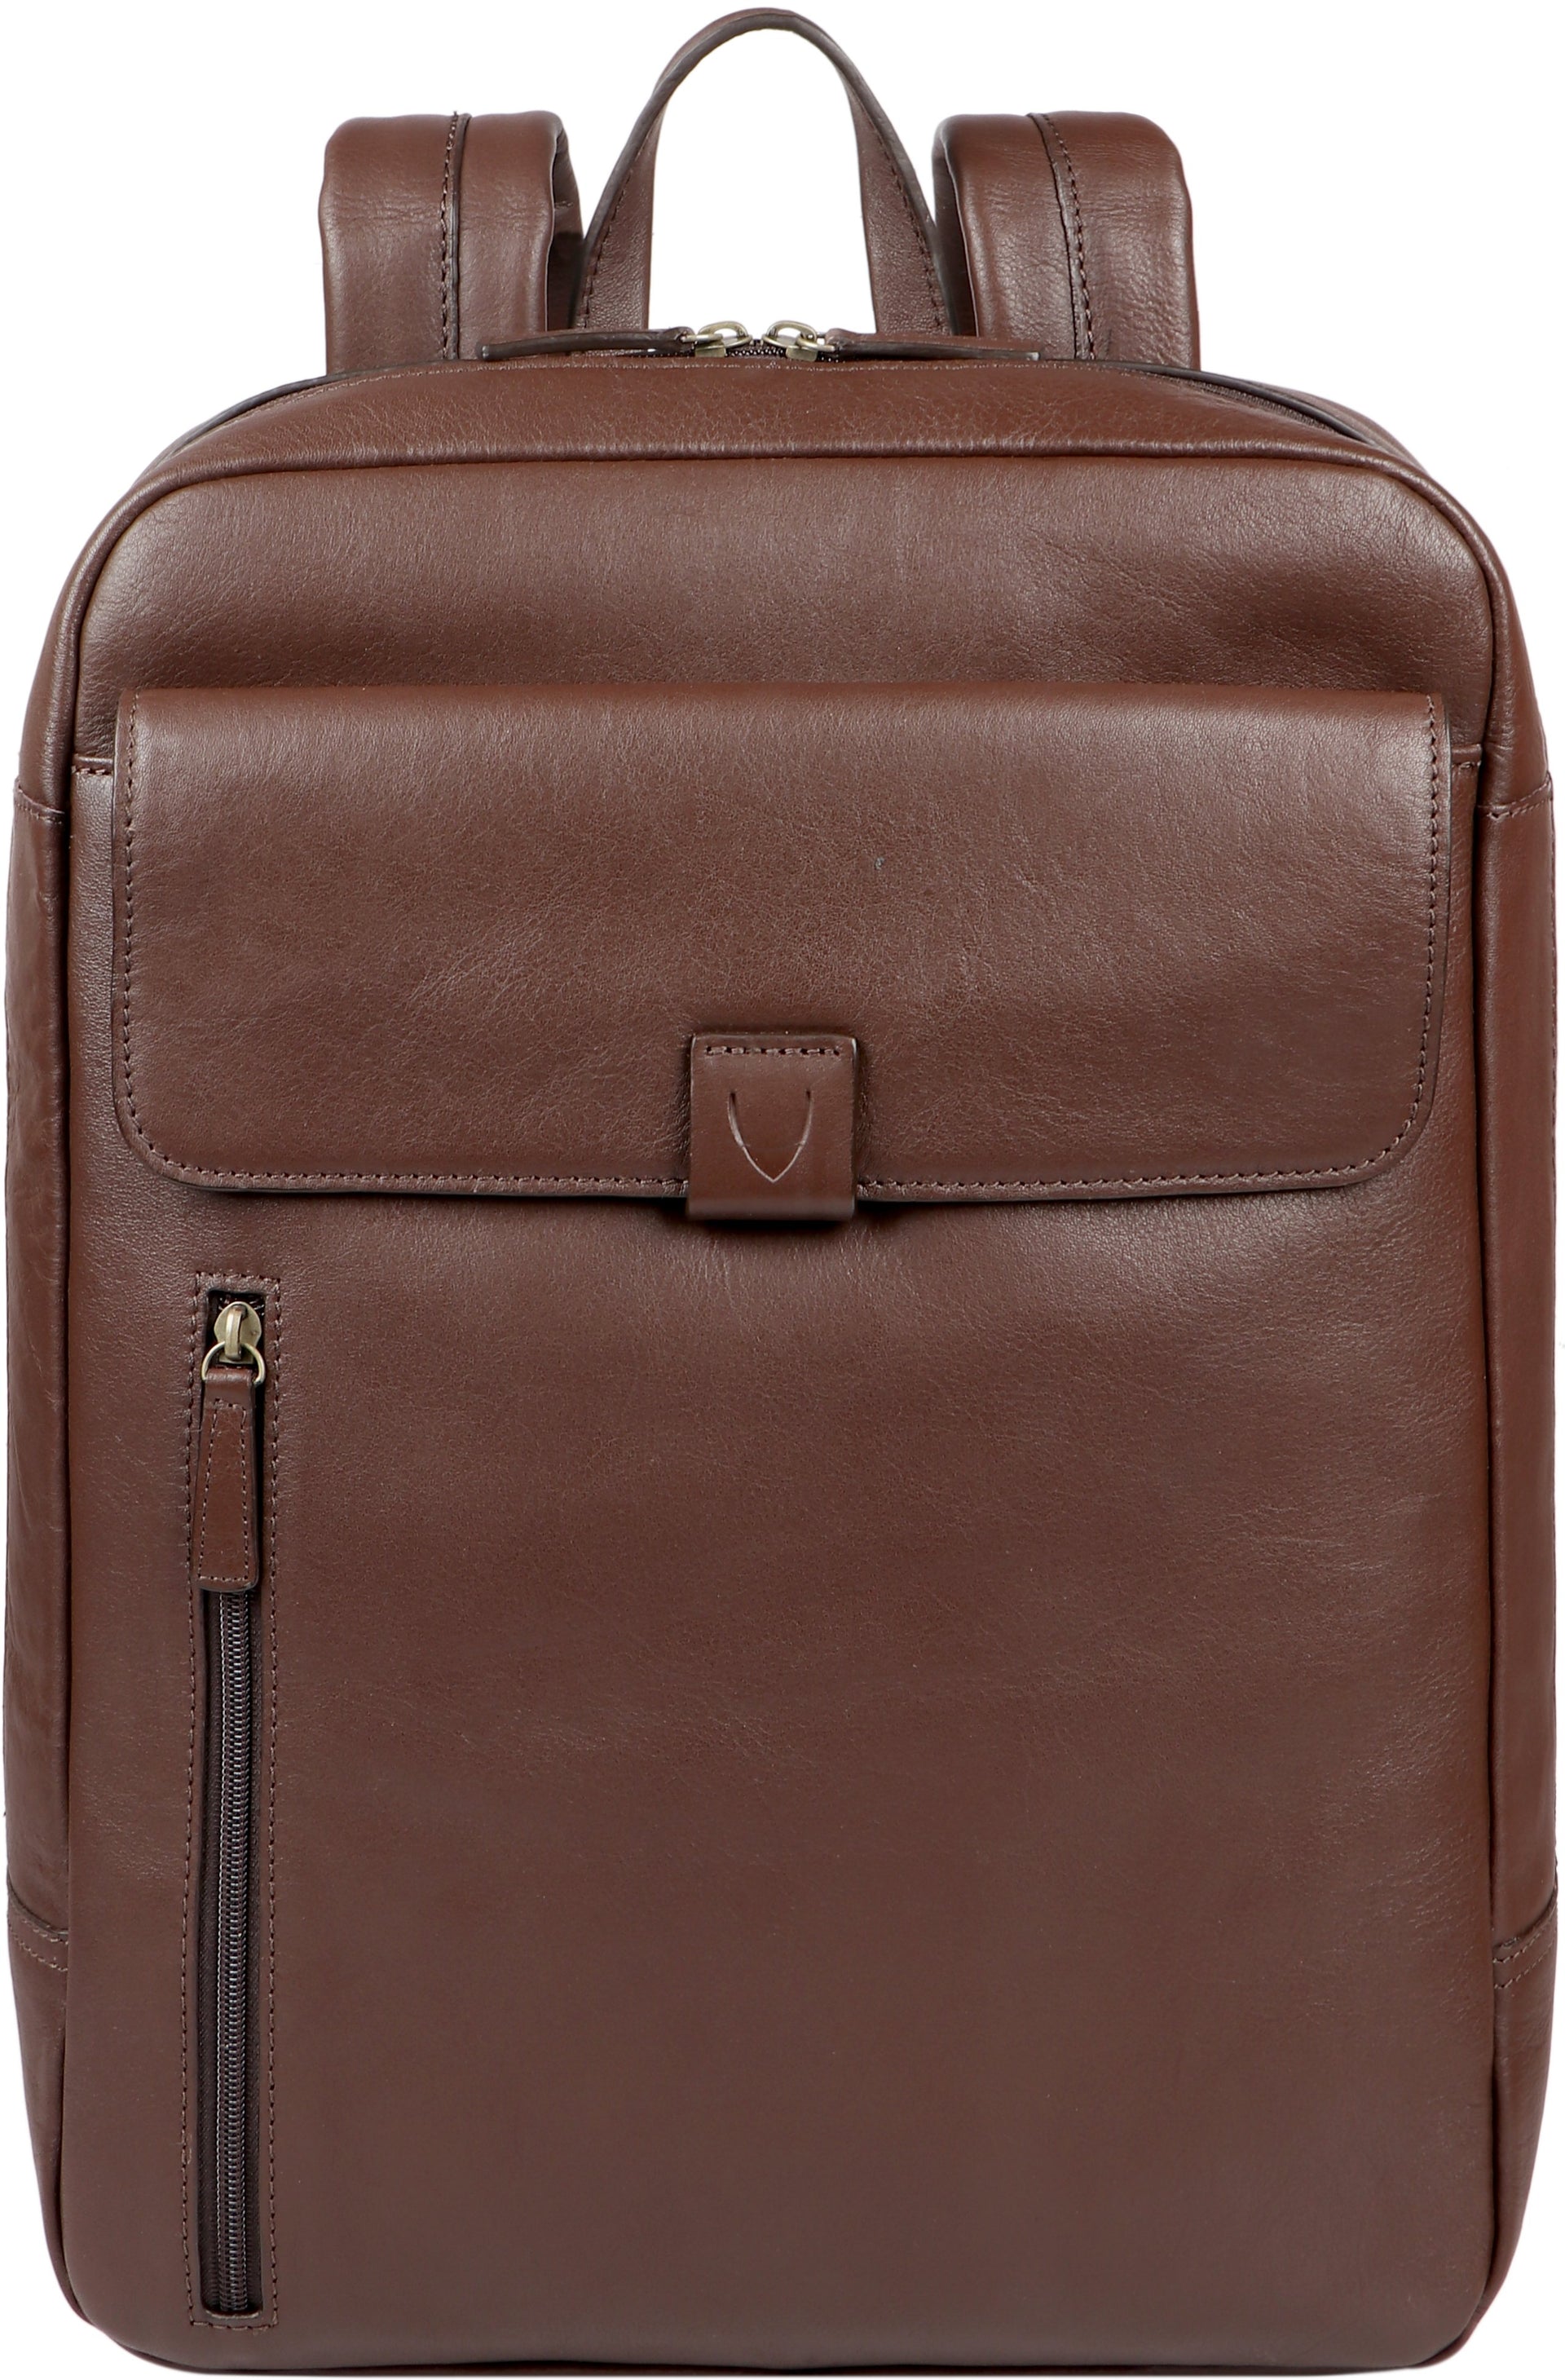 Hidesign Aiden Large Multi-Functional Leather Backpack - Mercantile Mountain